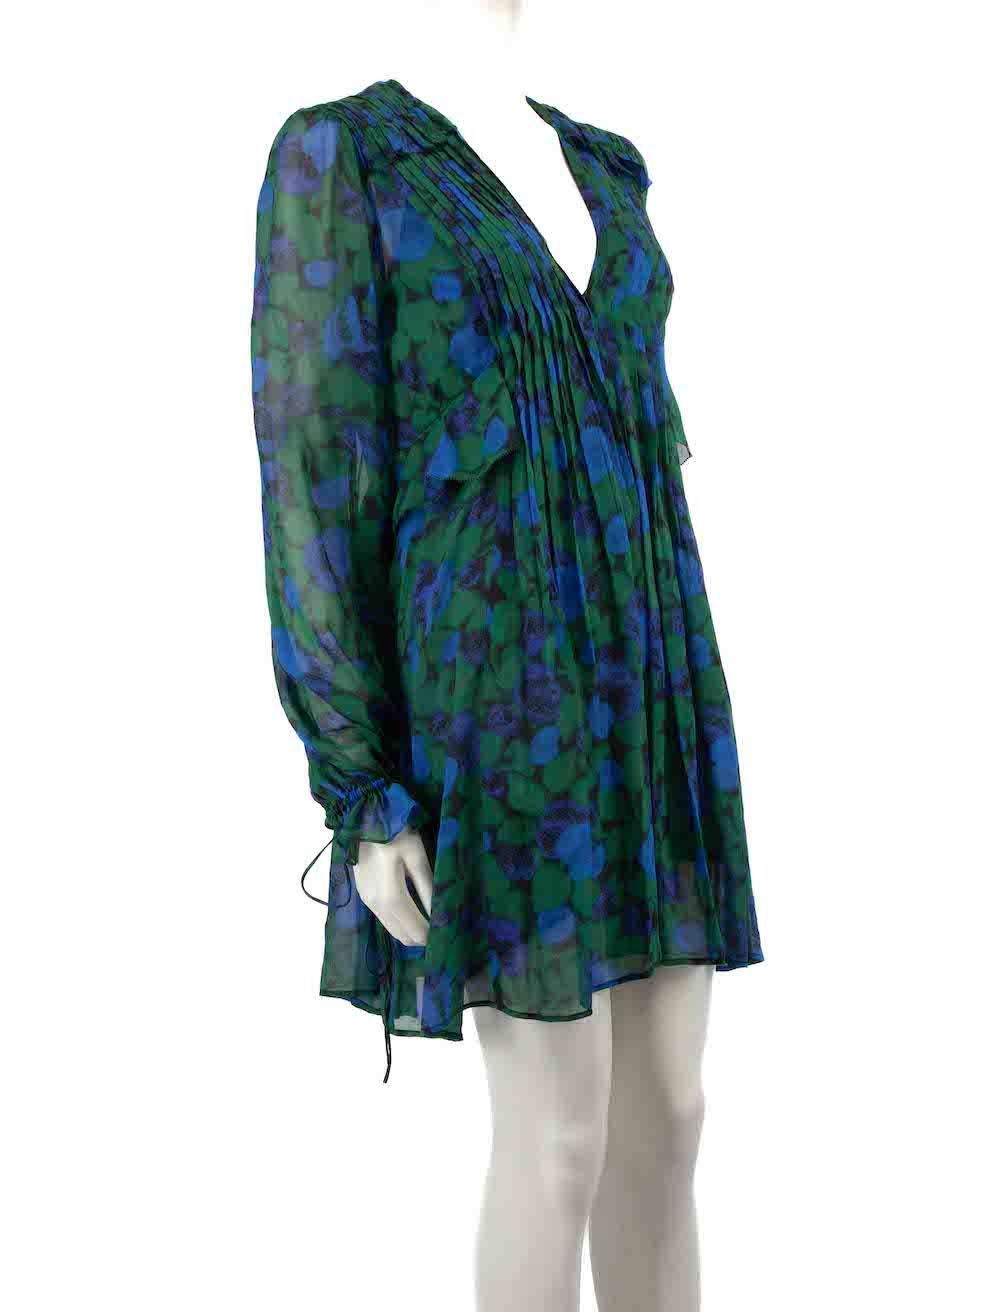 CONDITION is Never worn, with tags. No visible wear to dress is evident on this new The Kooples designer resale item.
 
 Details
 Multicolour- green and blue
 Silk
 Dress
 Floral pattern
 Mini
 Ruffle and pleated detail
 Long sleeves
 Sheer
 V-neck
